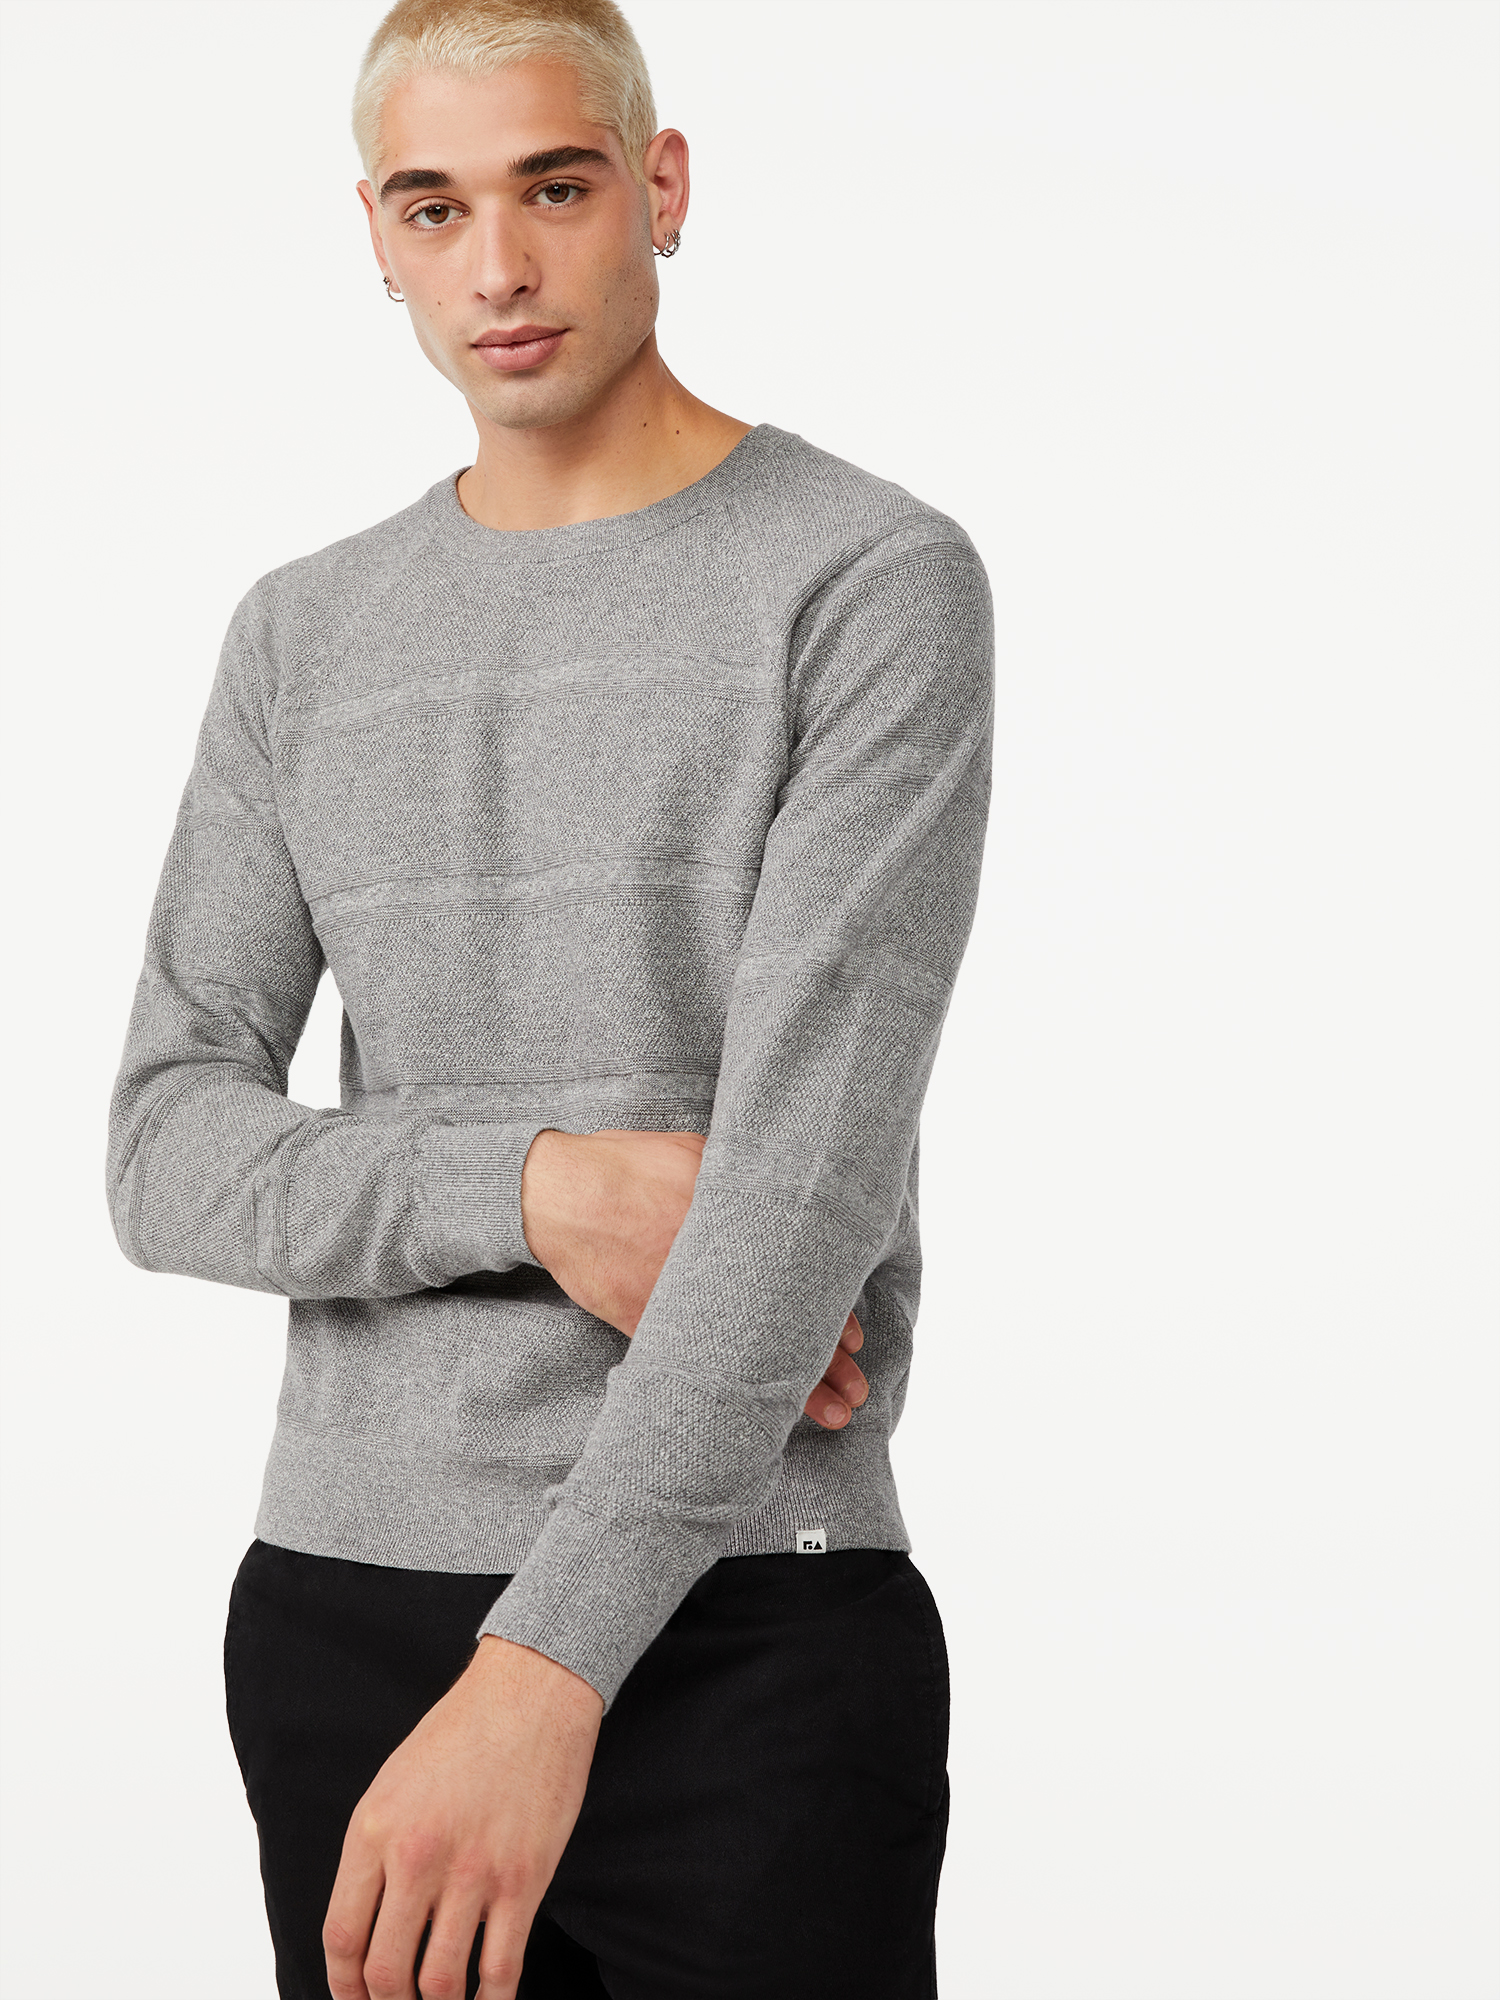 Free Assembly Men's Textured Striped Sweater - image 1 of 5